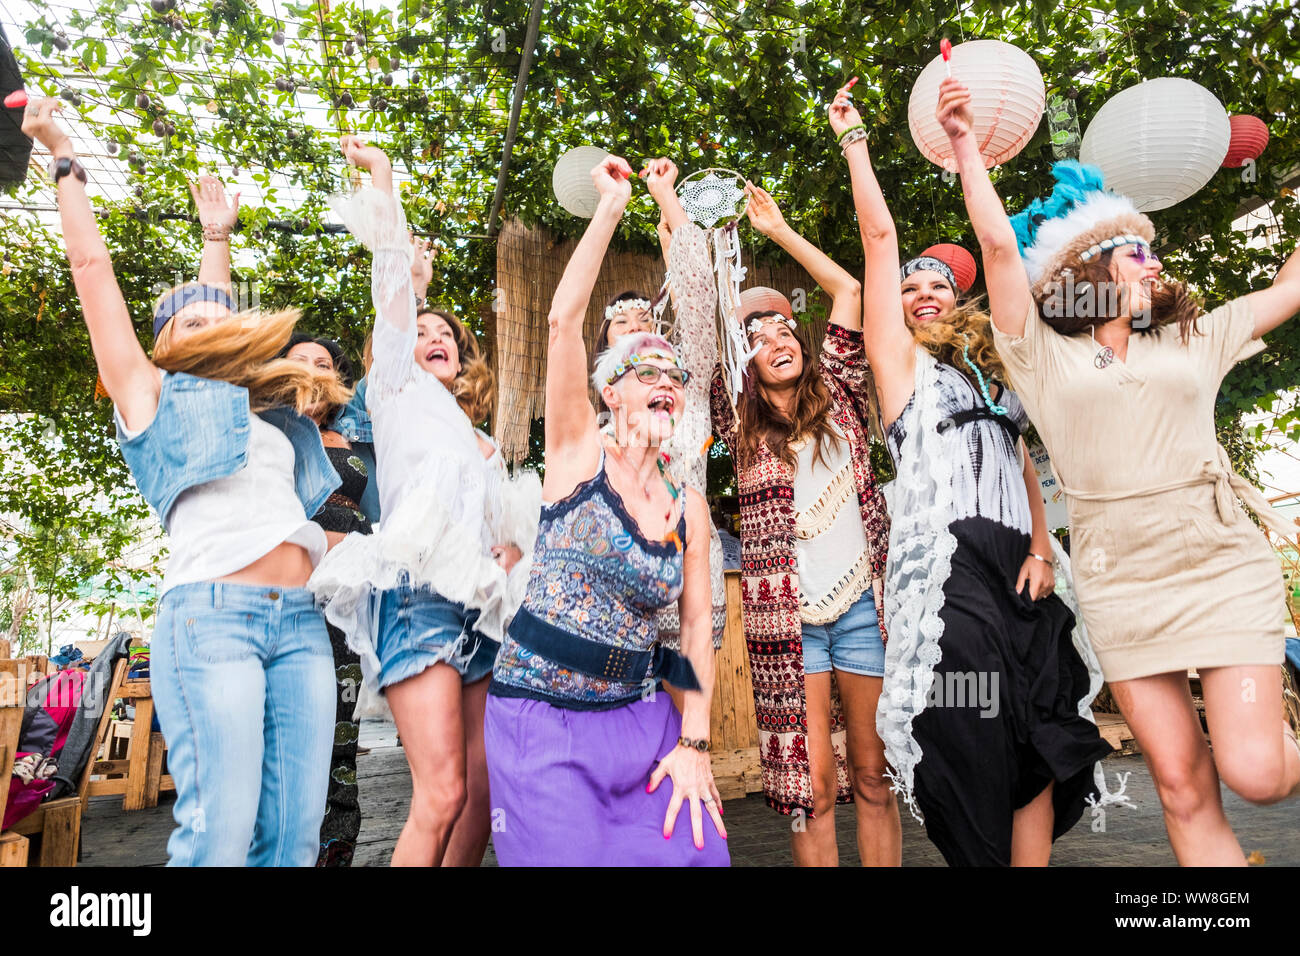 group of crazy women mixed ages from young to old having fun and dancing all together in a hippy style event, celebrating group people concept with coloured clothes and happiness Stock Photo